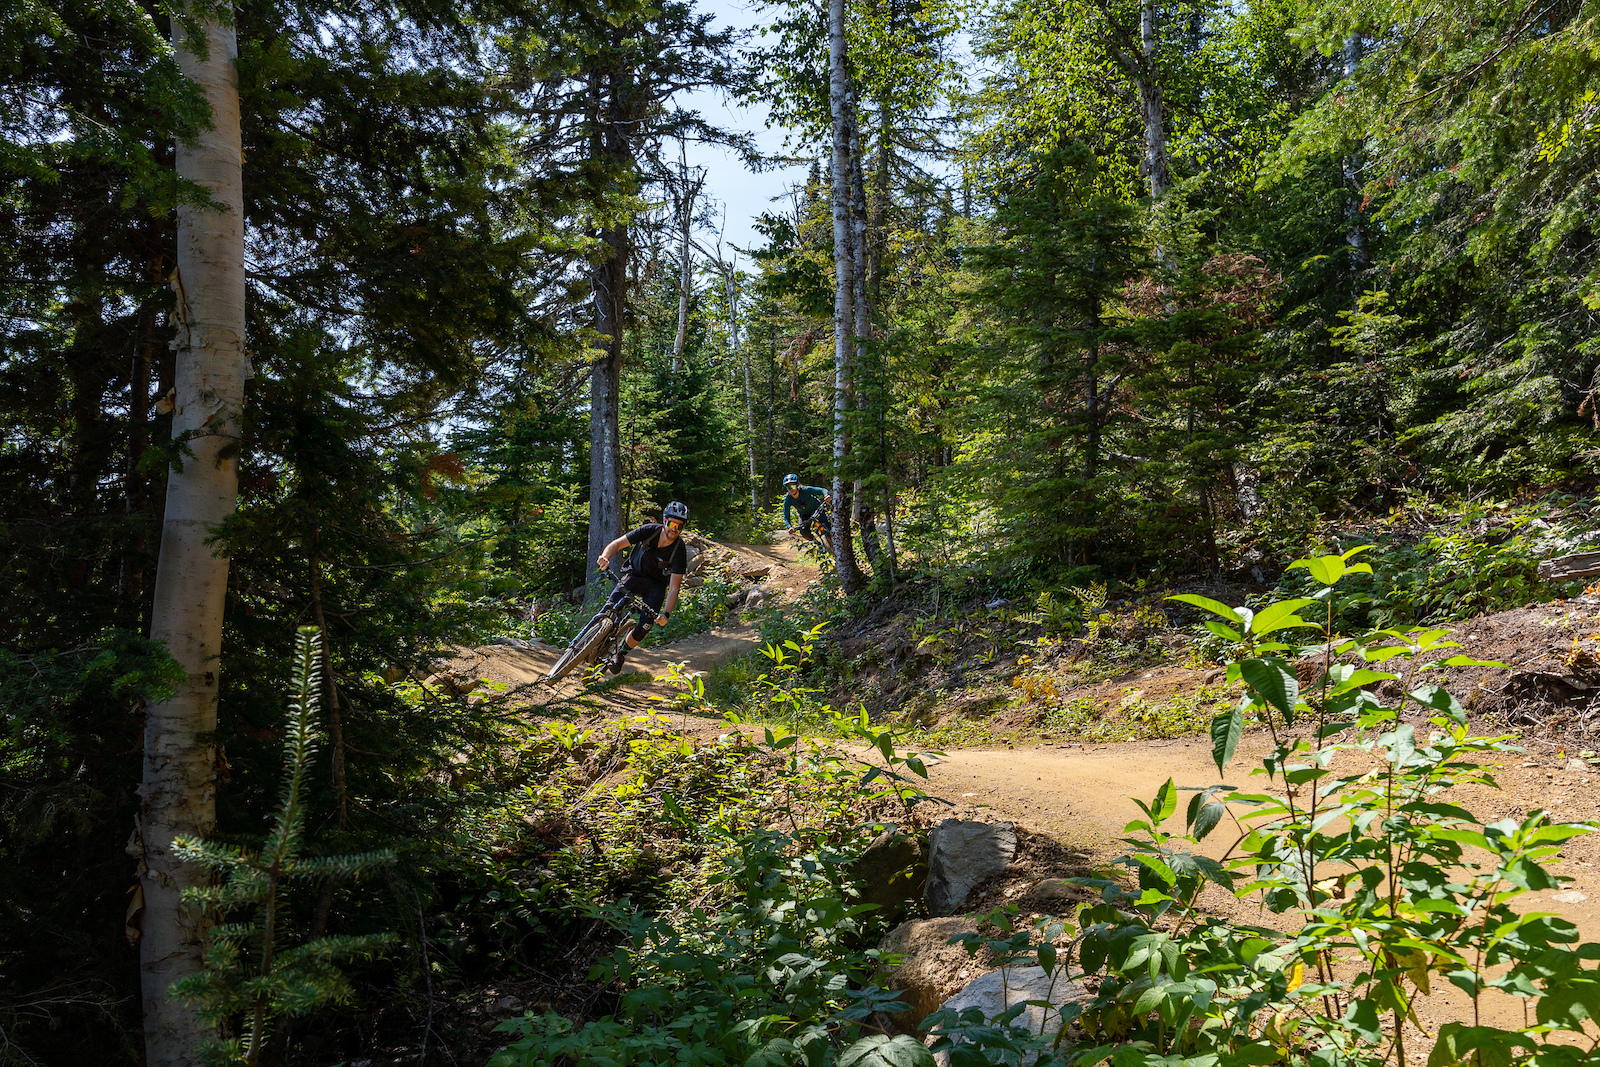 Mountain biking with Christina Chappetta and Jason Lucas at Le Massif de Charlevoix near Quebec City.